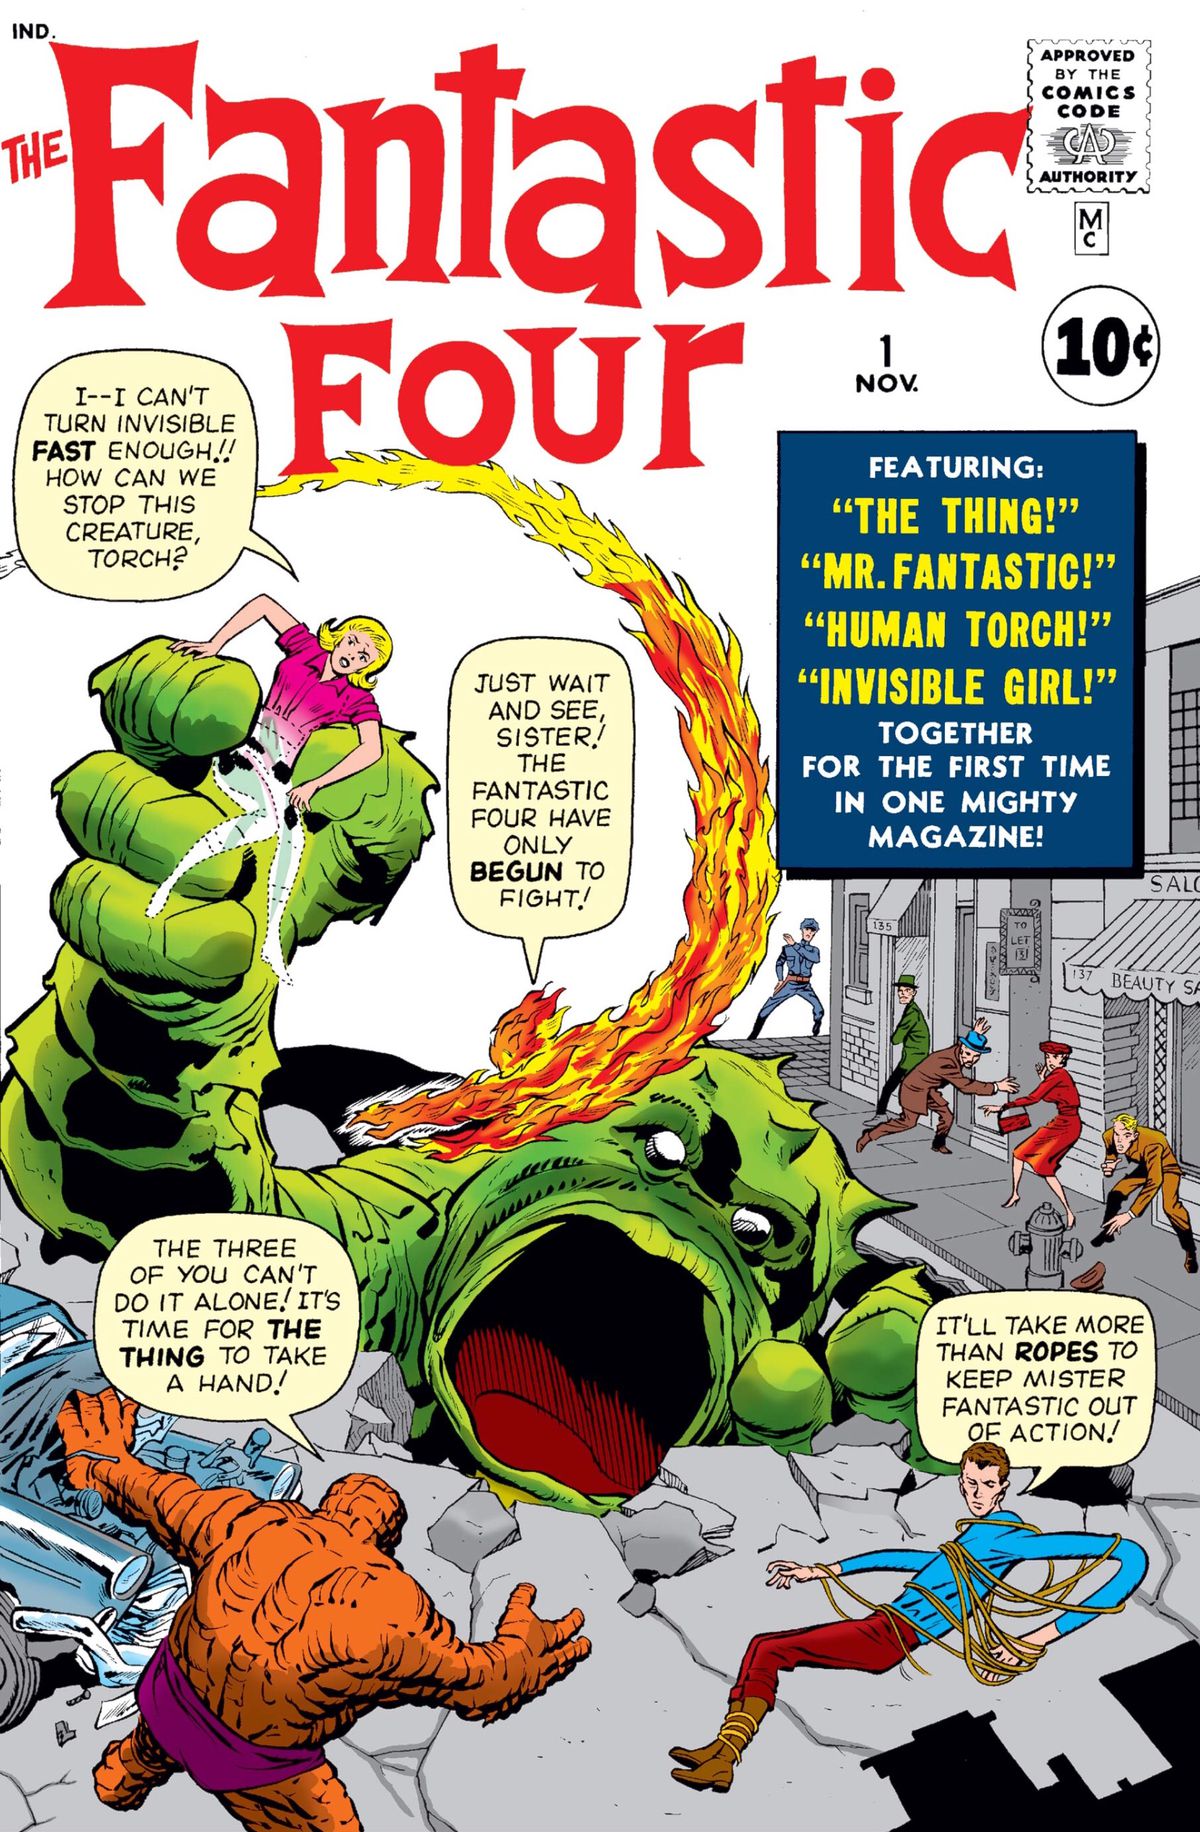 Cover of The Fantastic Four #1, Marvel Comics (1961).